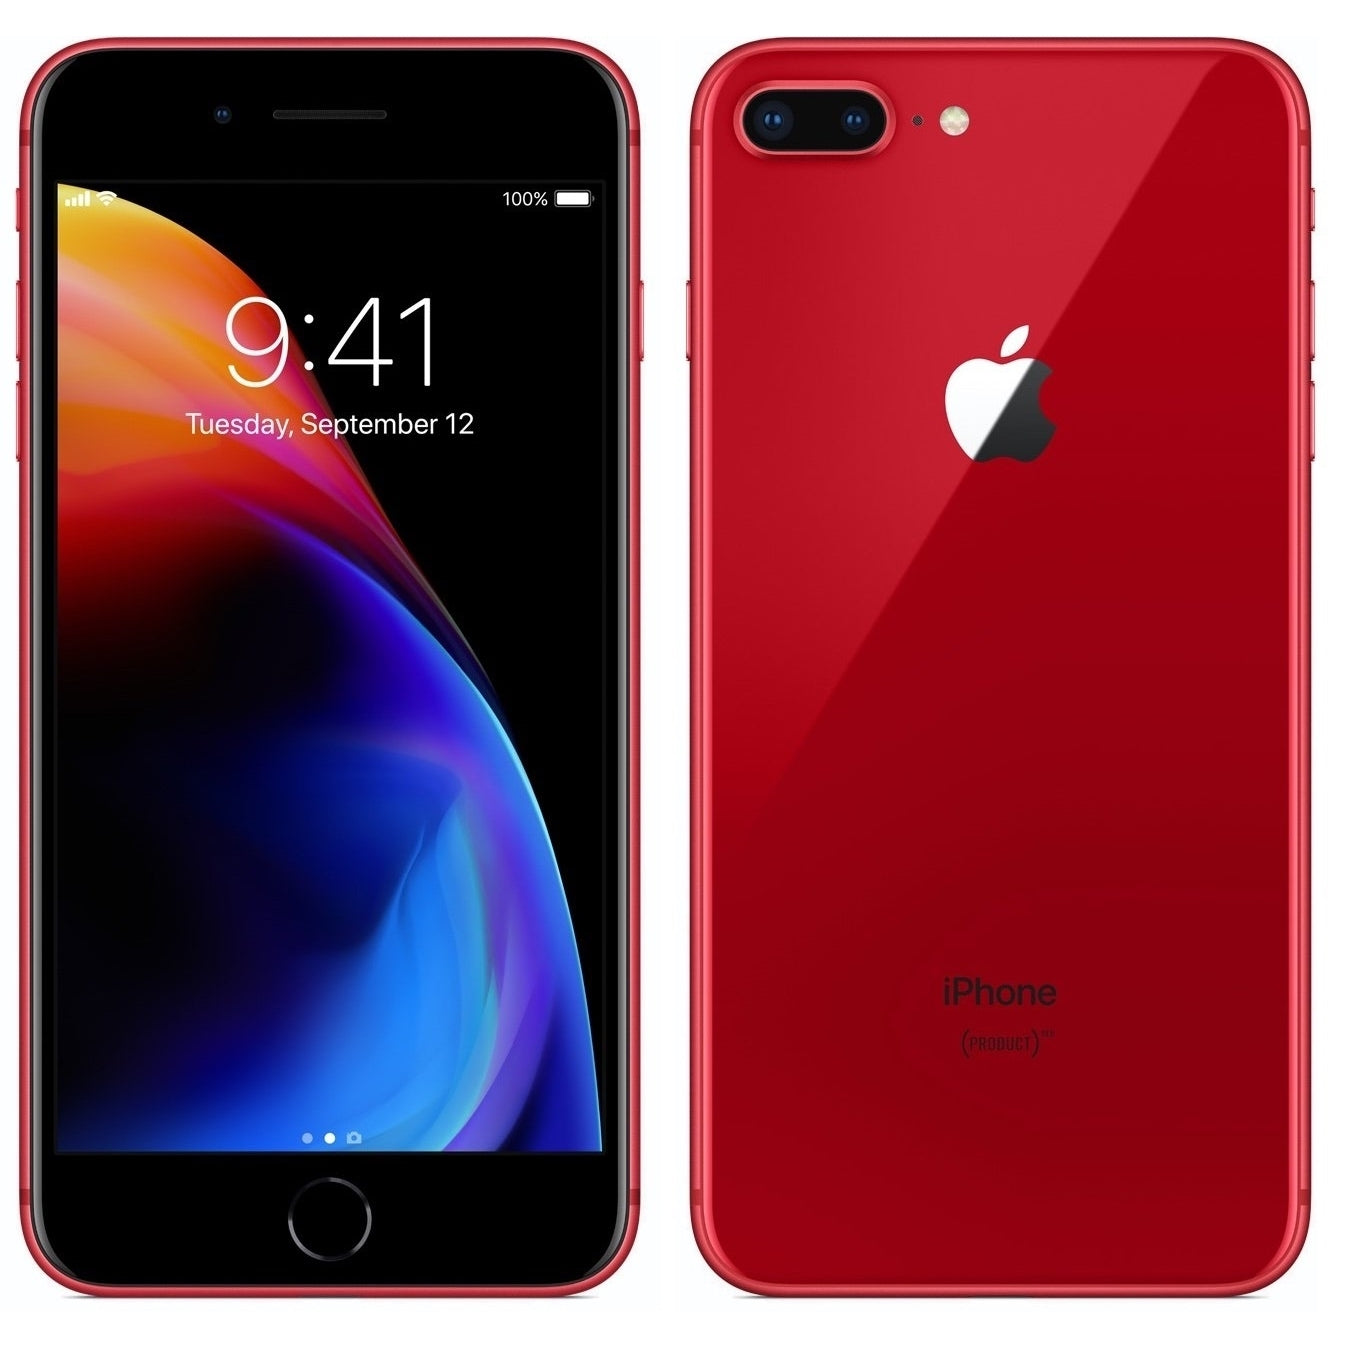 Apple iPhone 8 Plus 64GB 4G LTE AT&T iOS, Red (Certified Refurbished